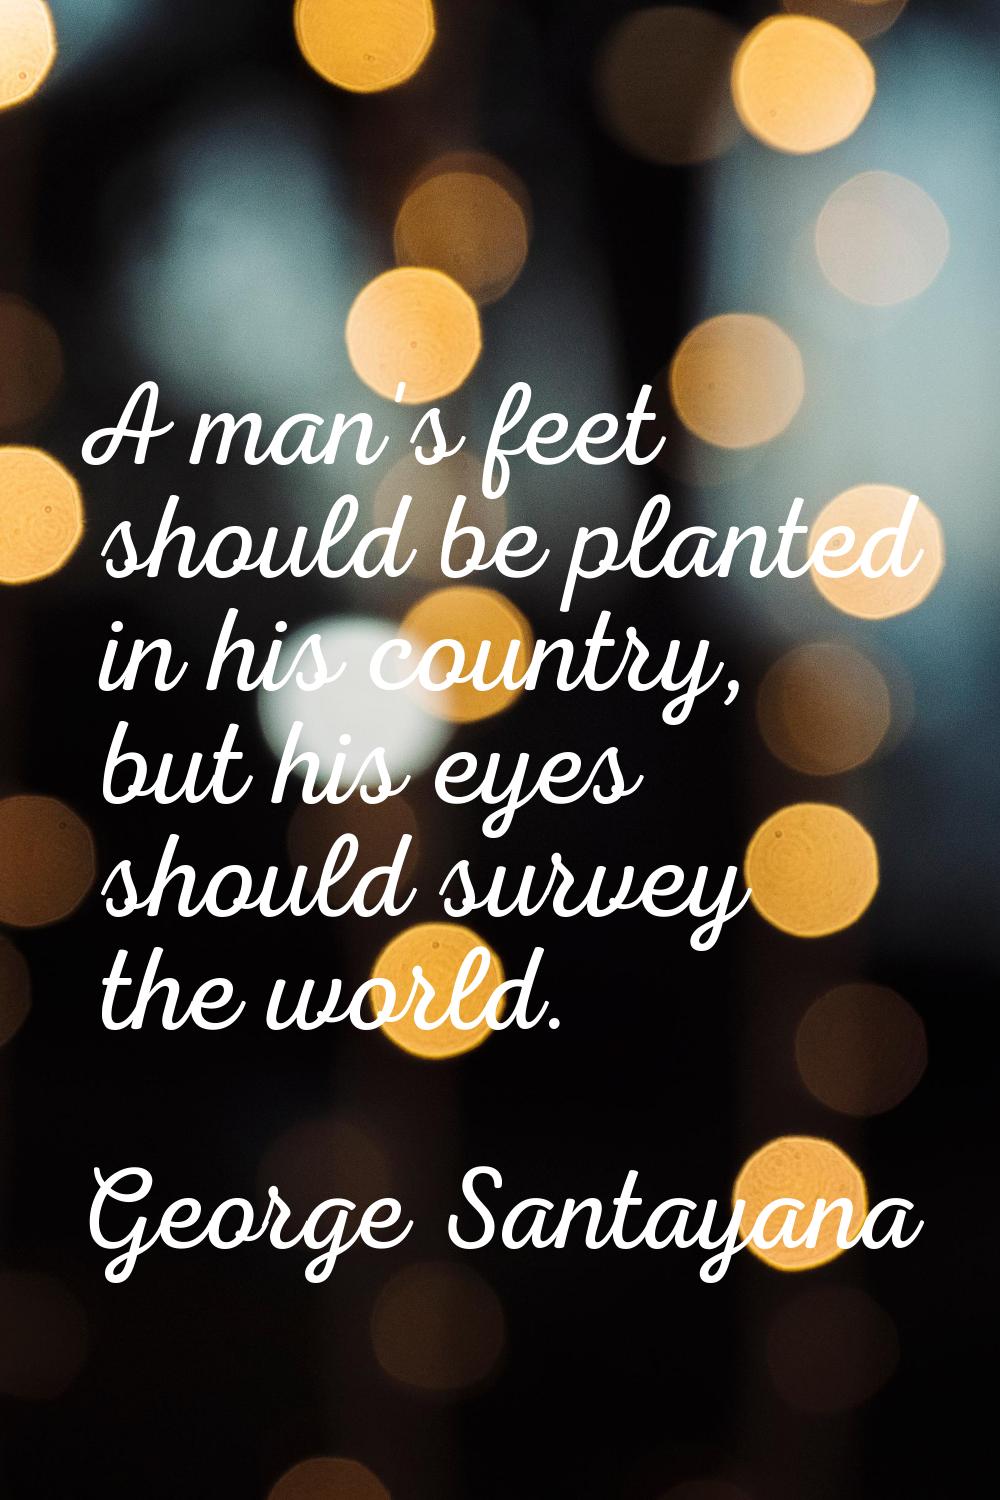 A man's feet should be planted in his country, but his eyes should survey the world.